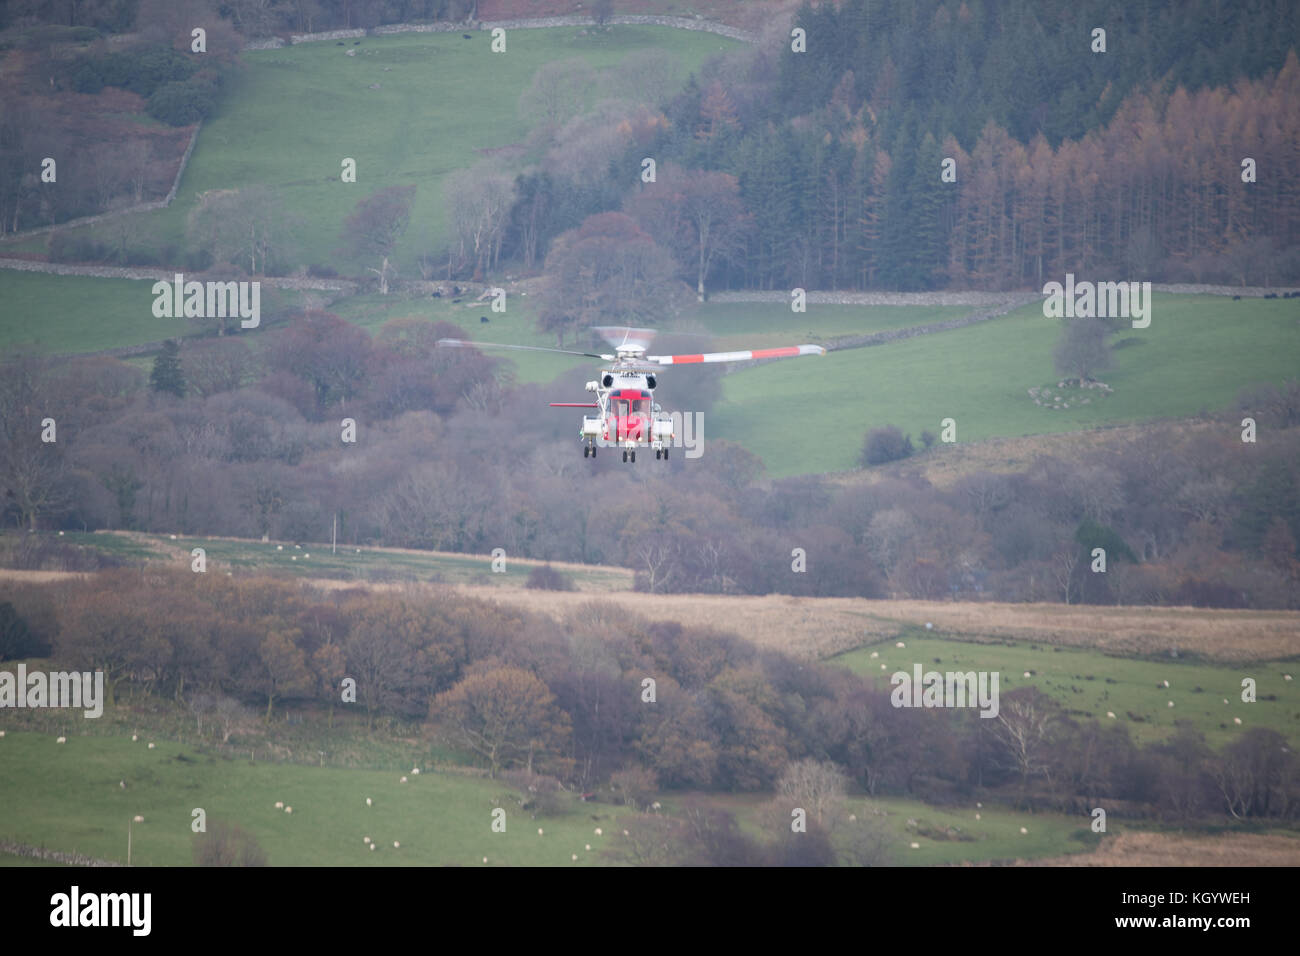 HM Coastguard Search & Rescue Helicopter Rescue 936, conducting low flying training in Snowdonia. Stock Photo